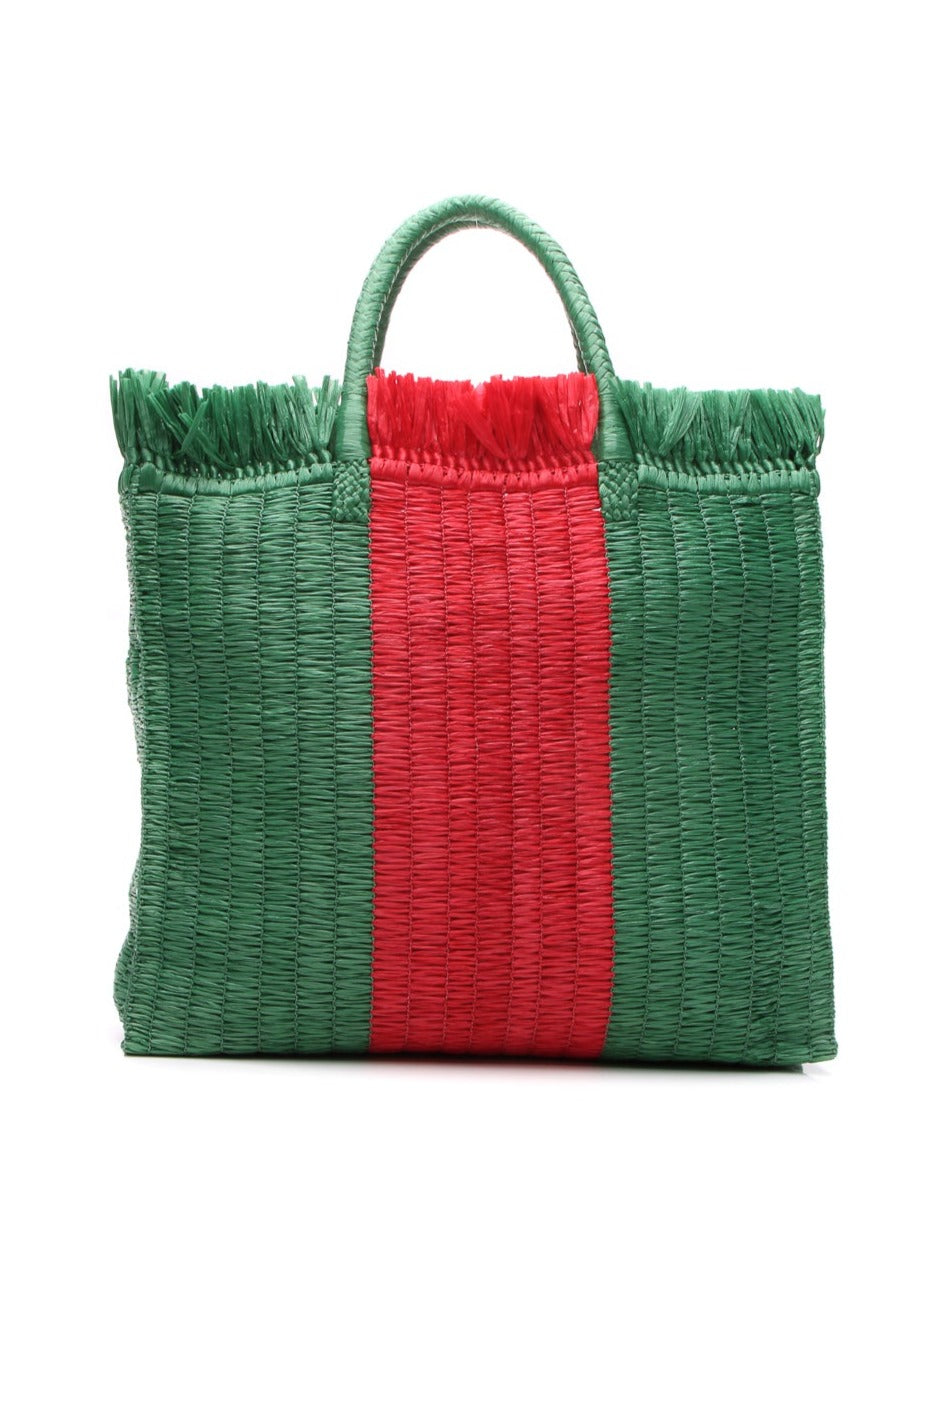 New Authentic Gucci Web Woven Straw Tote Shopper Bag Large